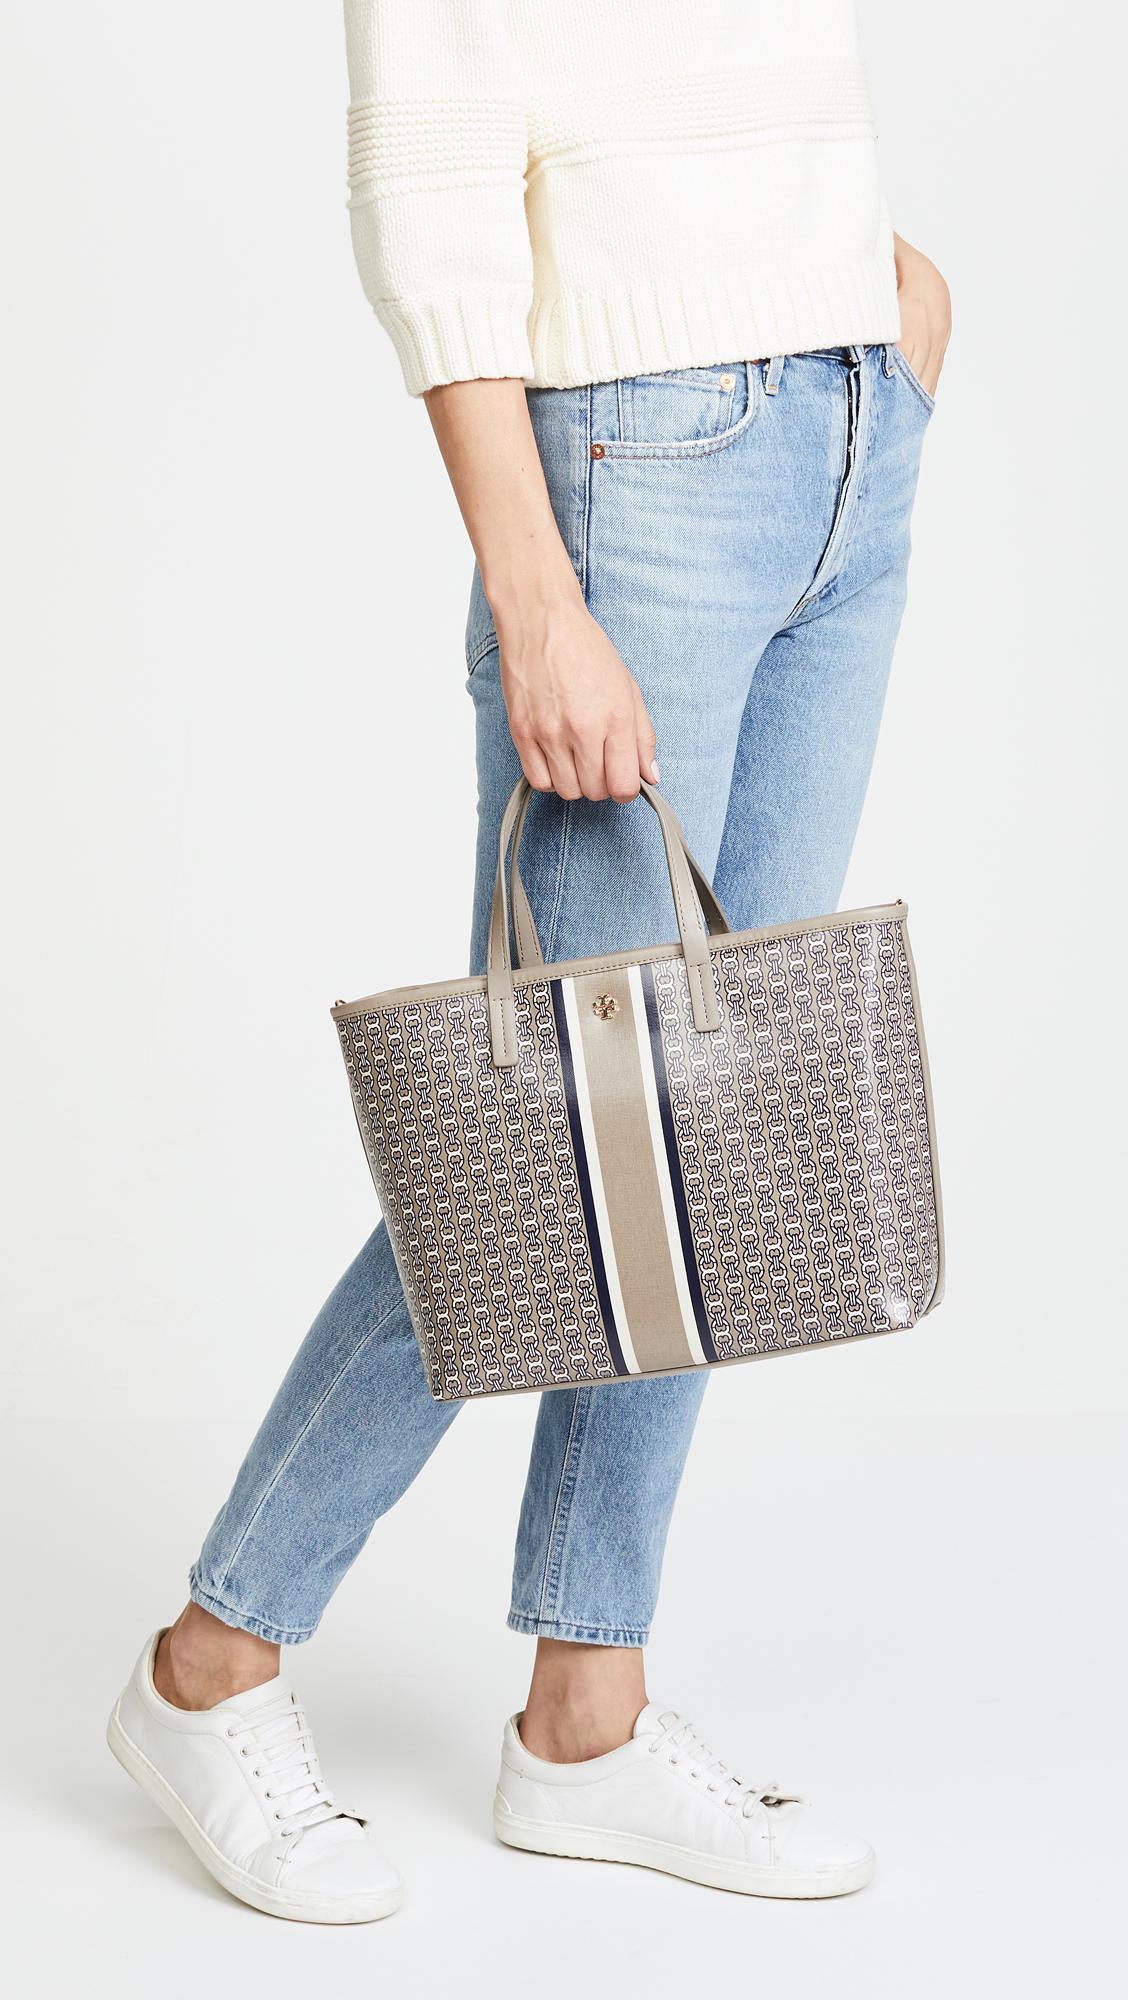 Lyst - Tory Burch Gemini Link Small Tote in Gray